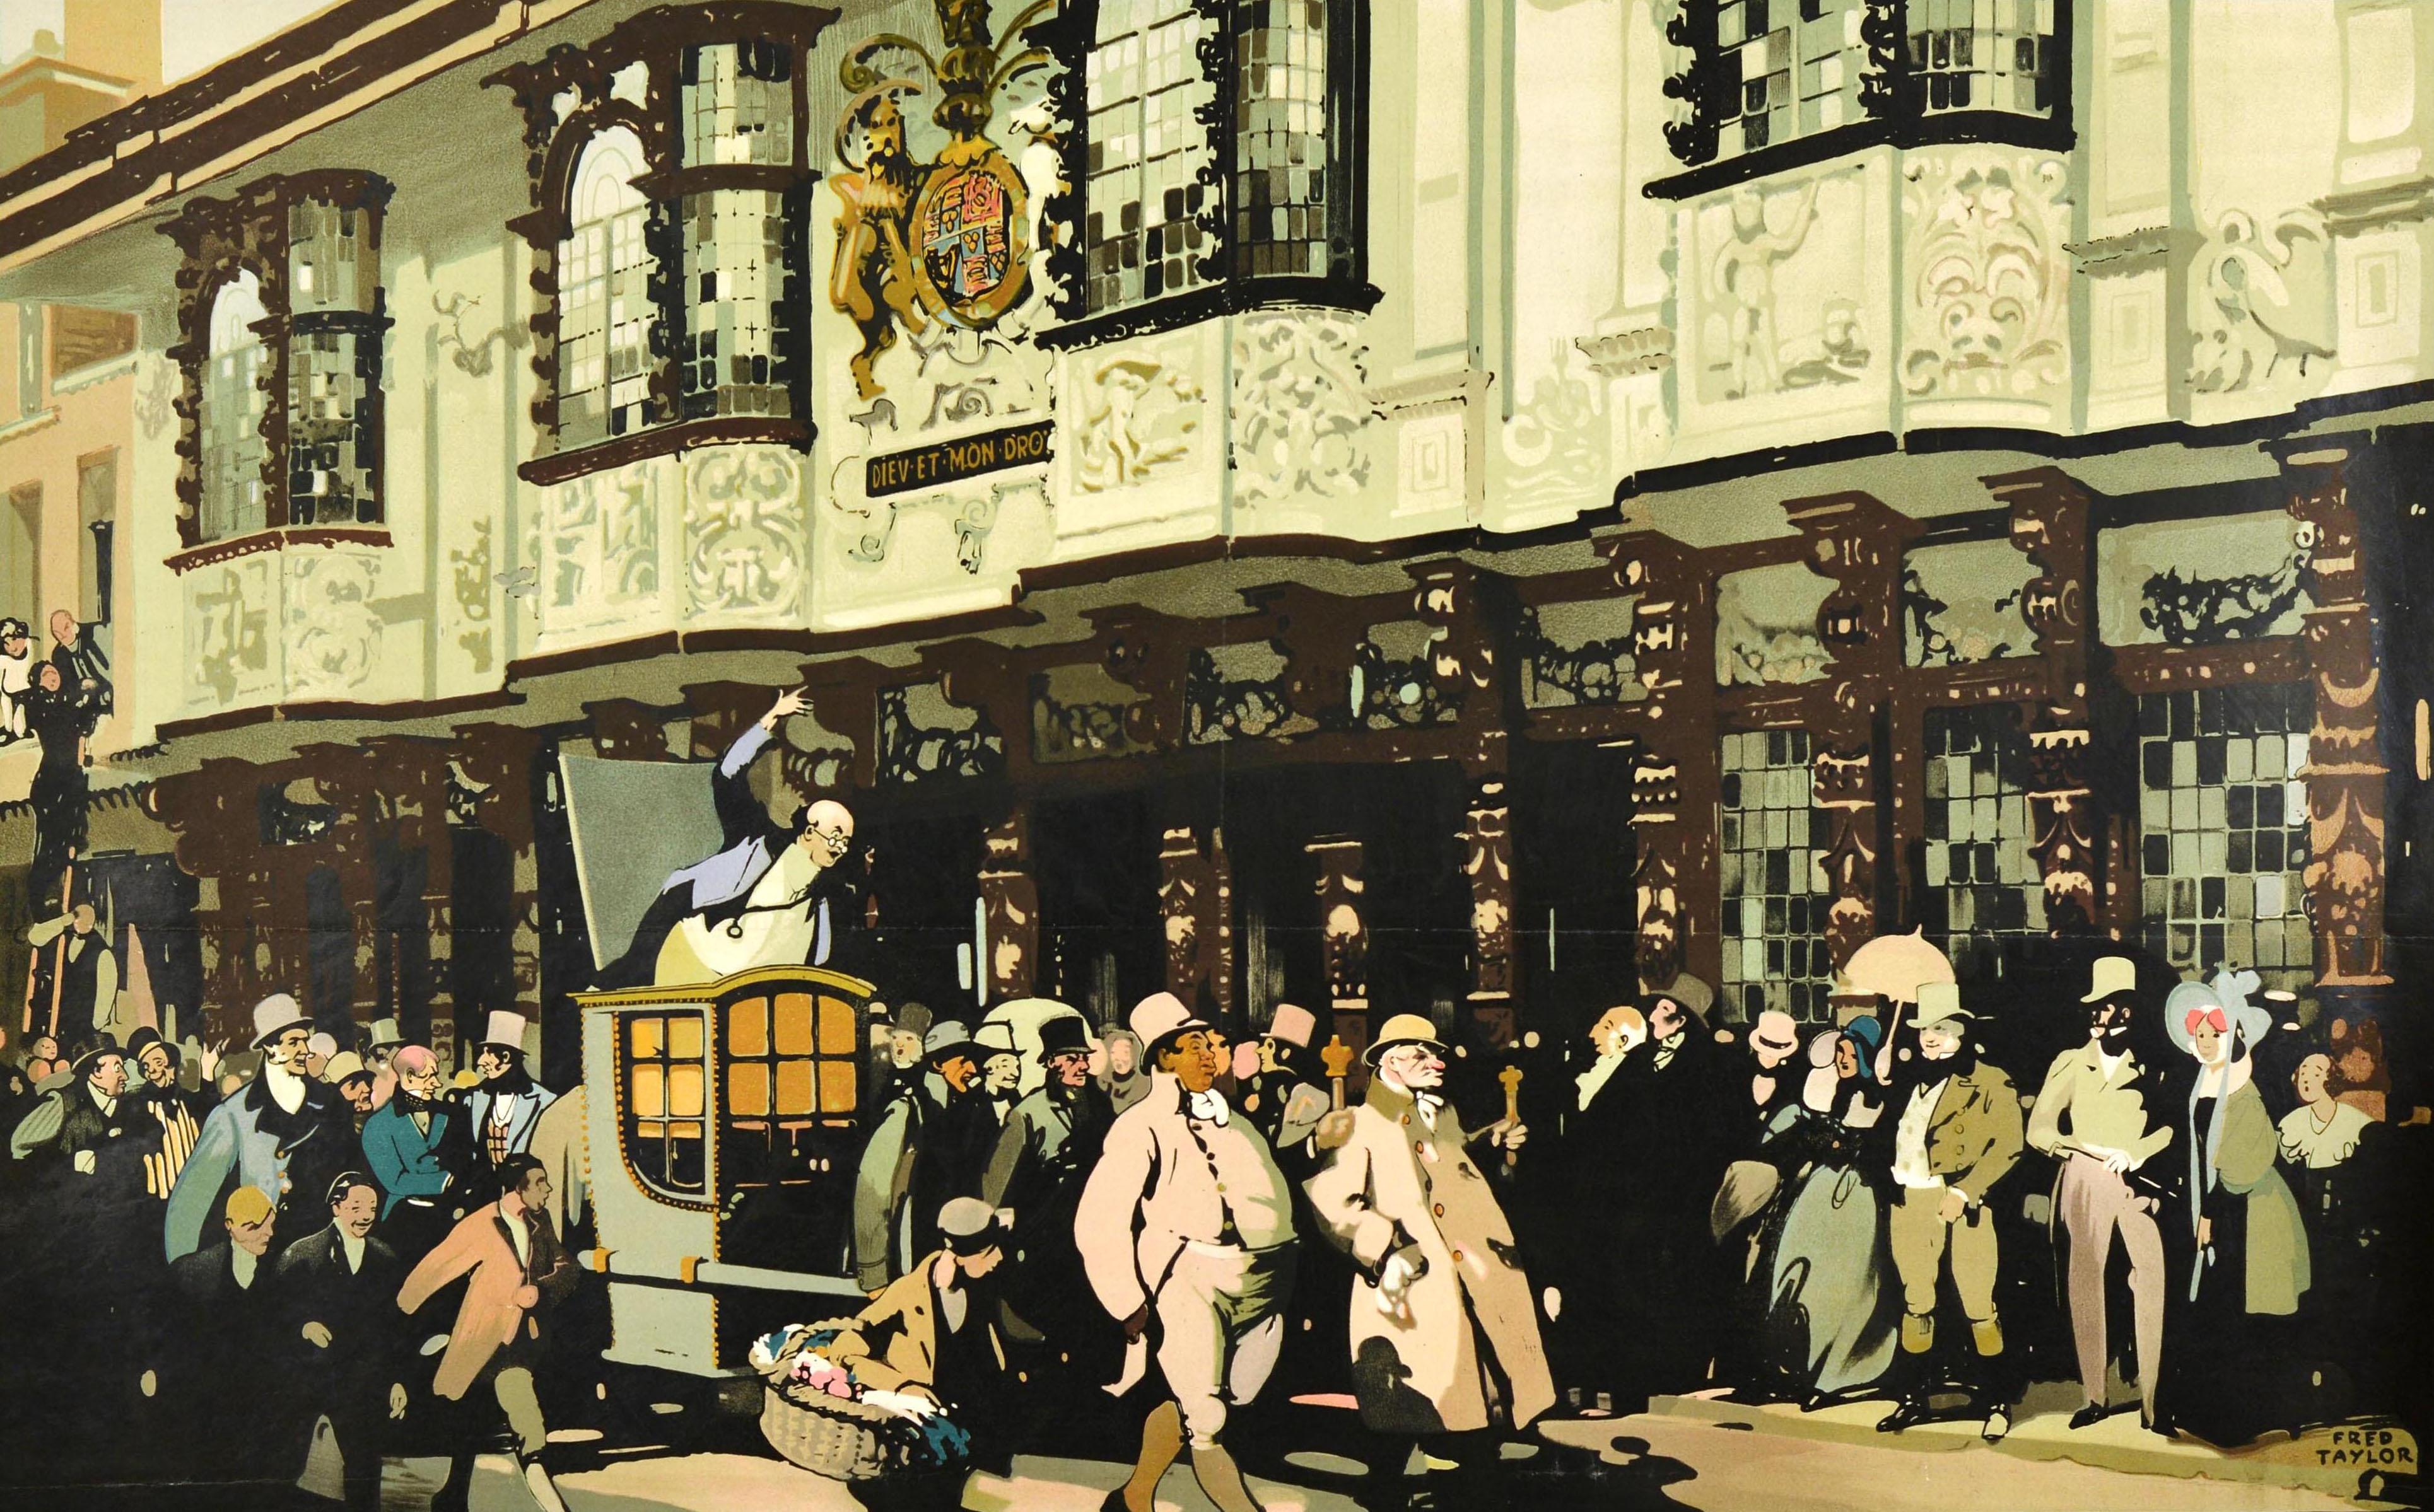 Original vintage LNER train travel poster for Ipswich featuring stunning artwork by the notable painter and poster artist Fred Taylor (1875-1963) titled Mr. Pickwick The Ancient House depicting a scene from the 1836-7 novel The Pickwick Papers by